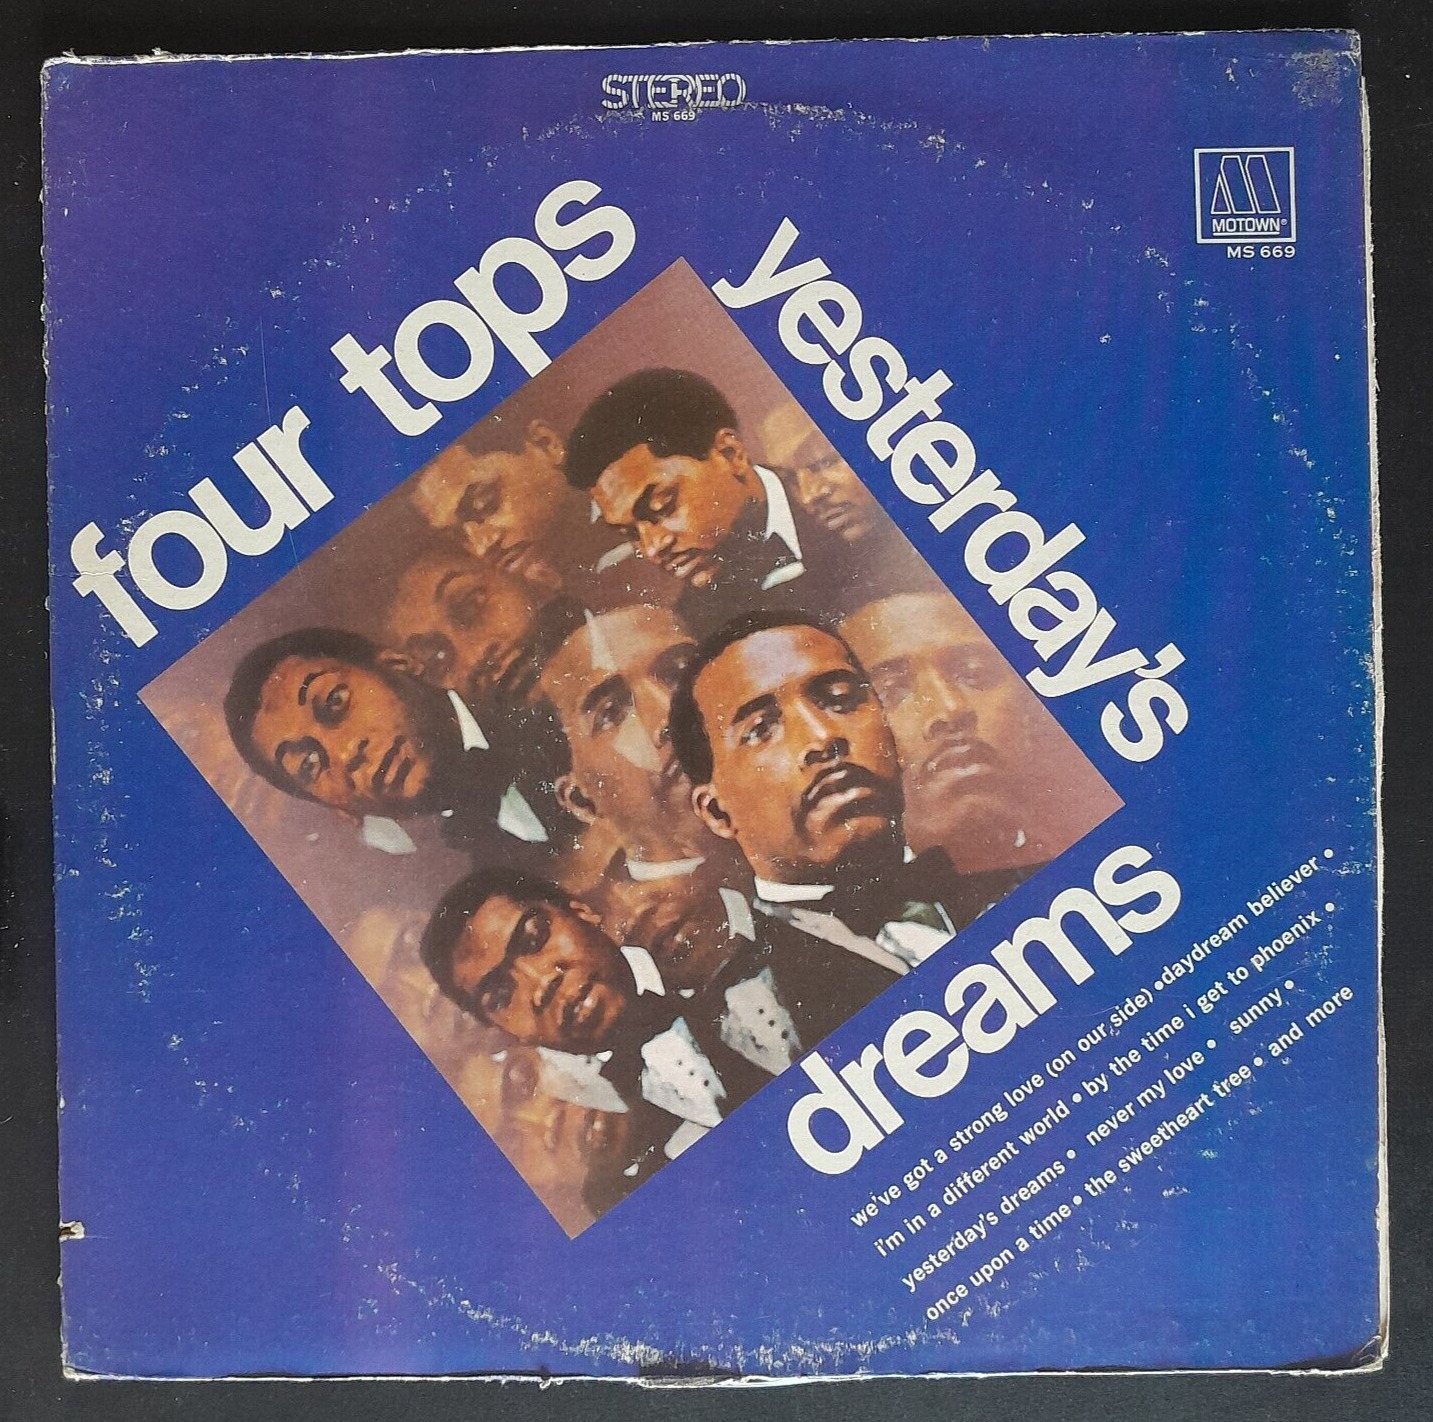 The Four Tops - Yesterday's Dreams Motown MS669 1968 US Stereo 1st Press